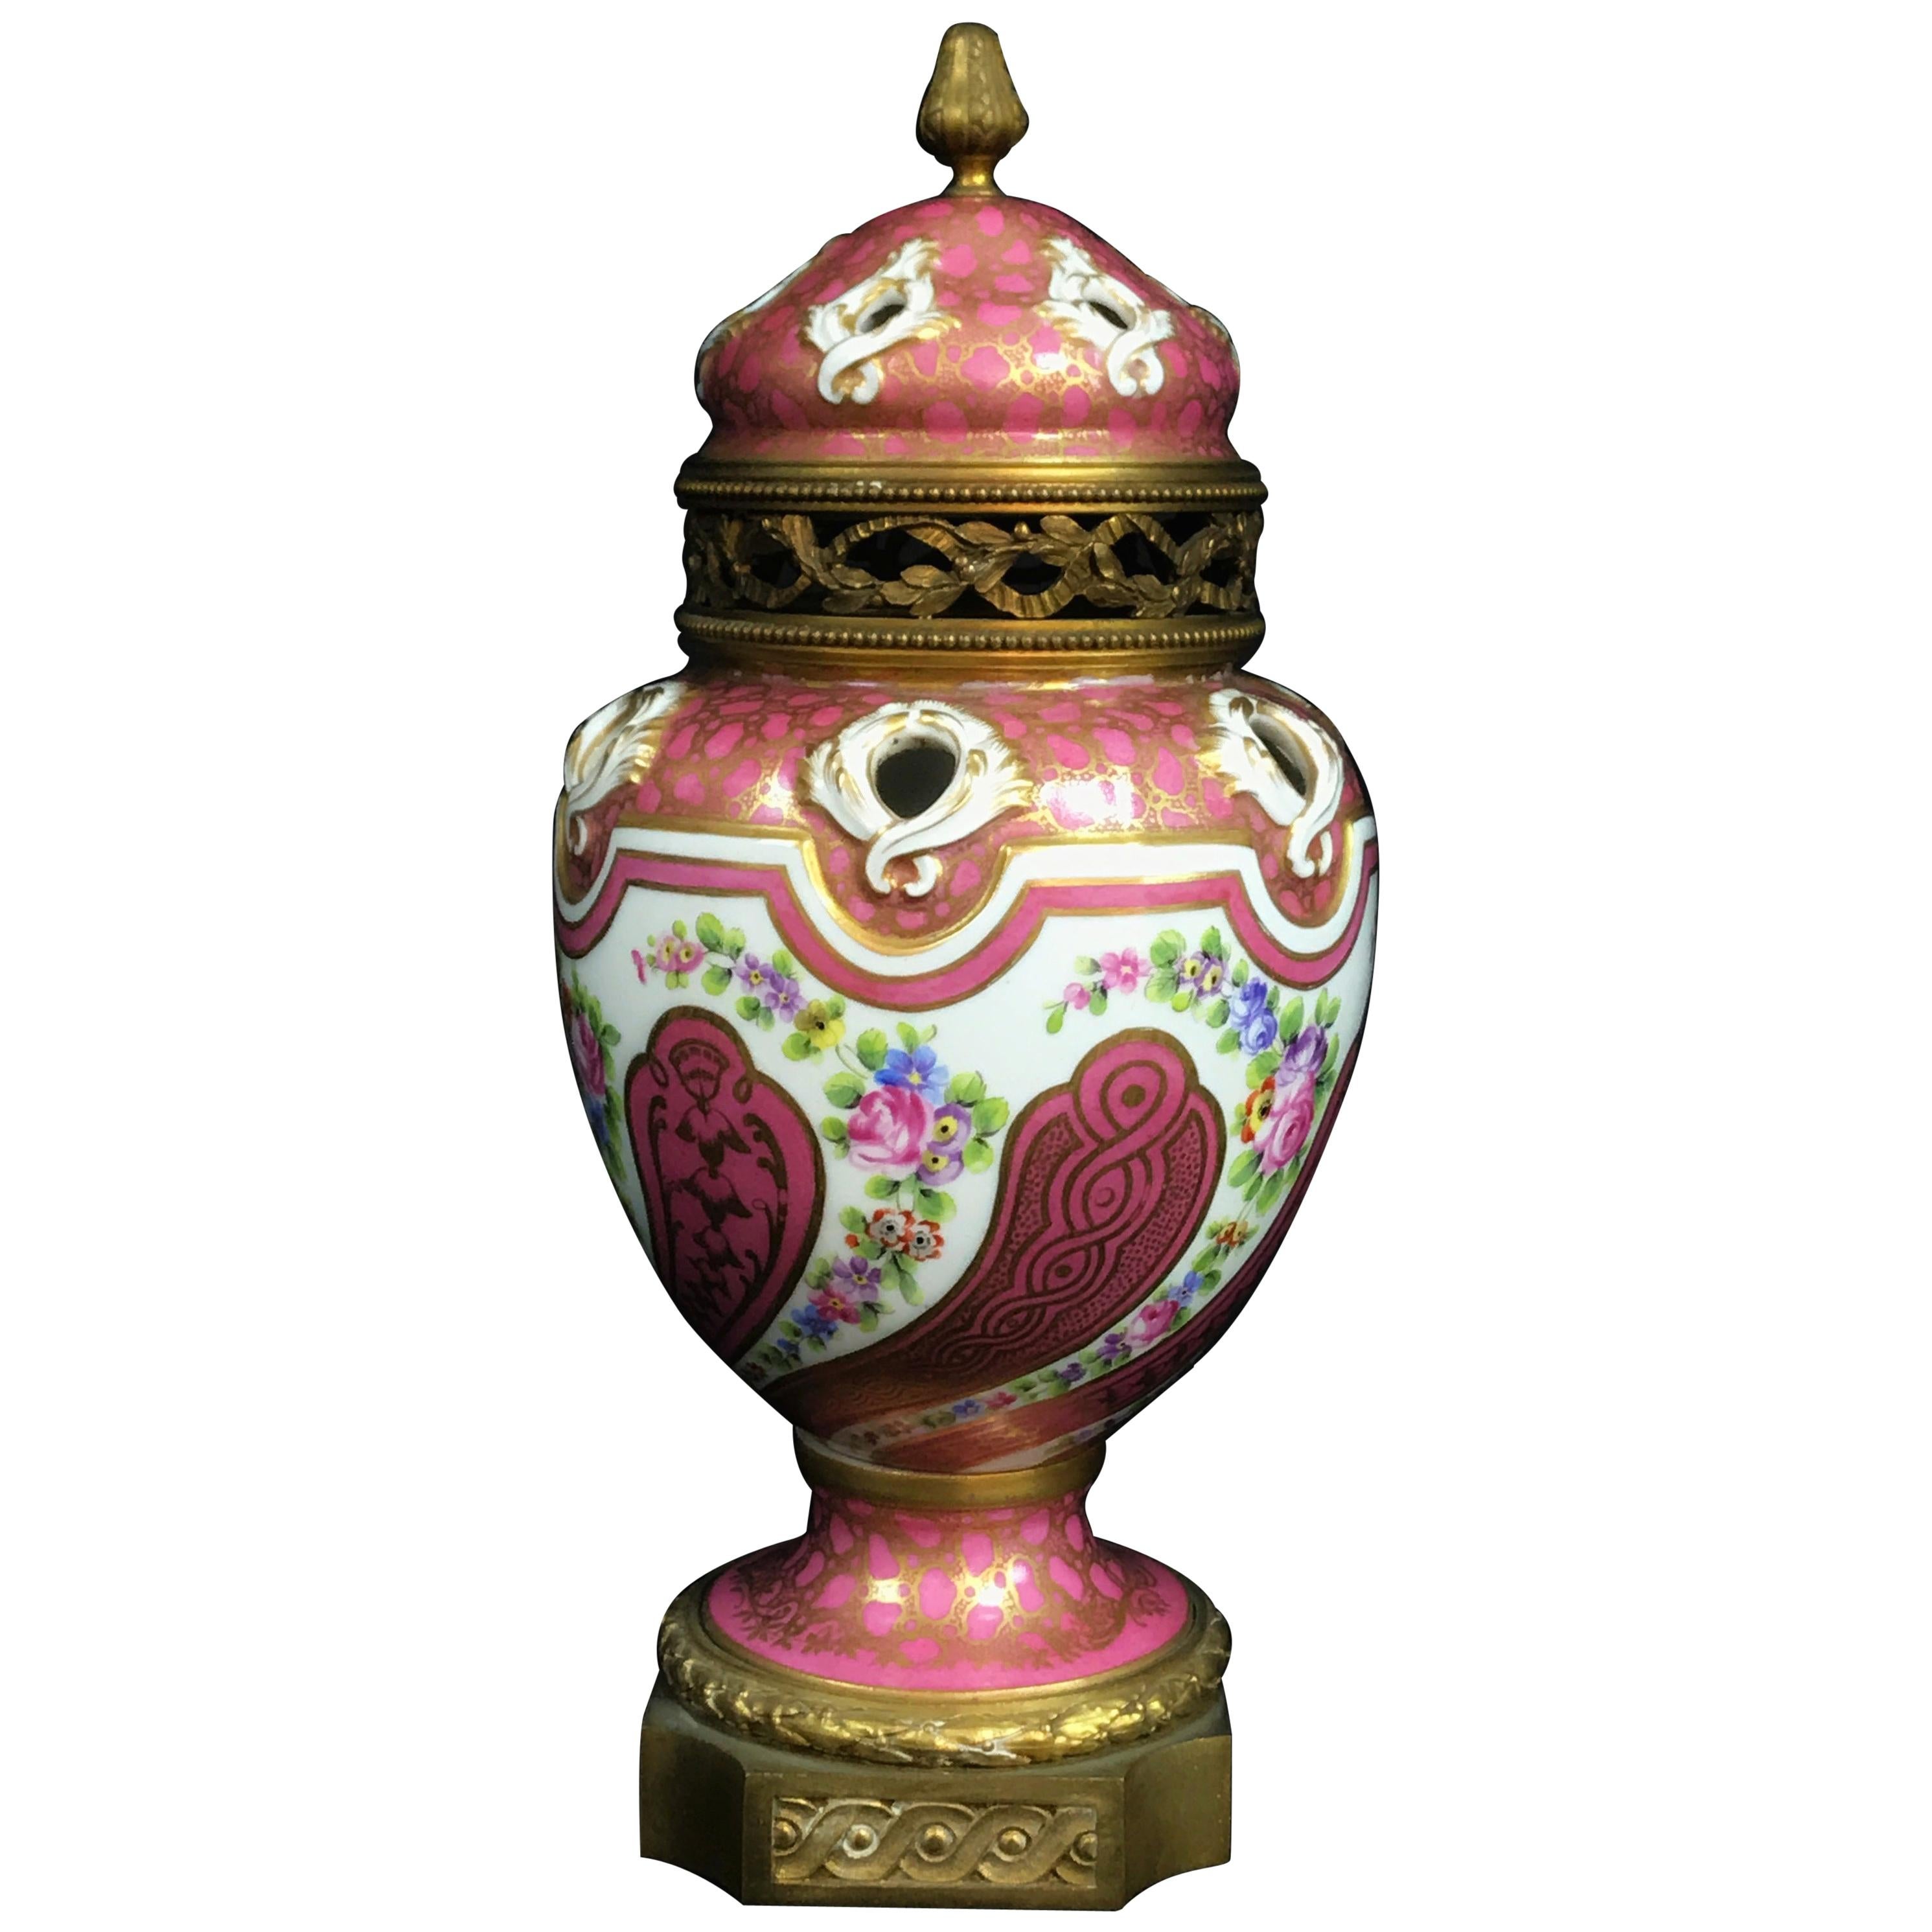 19th Century Polychrome Porcelain and Gilded Bronze French Perfume Burner